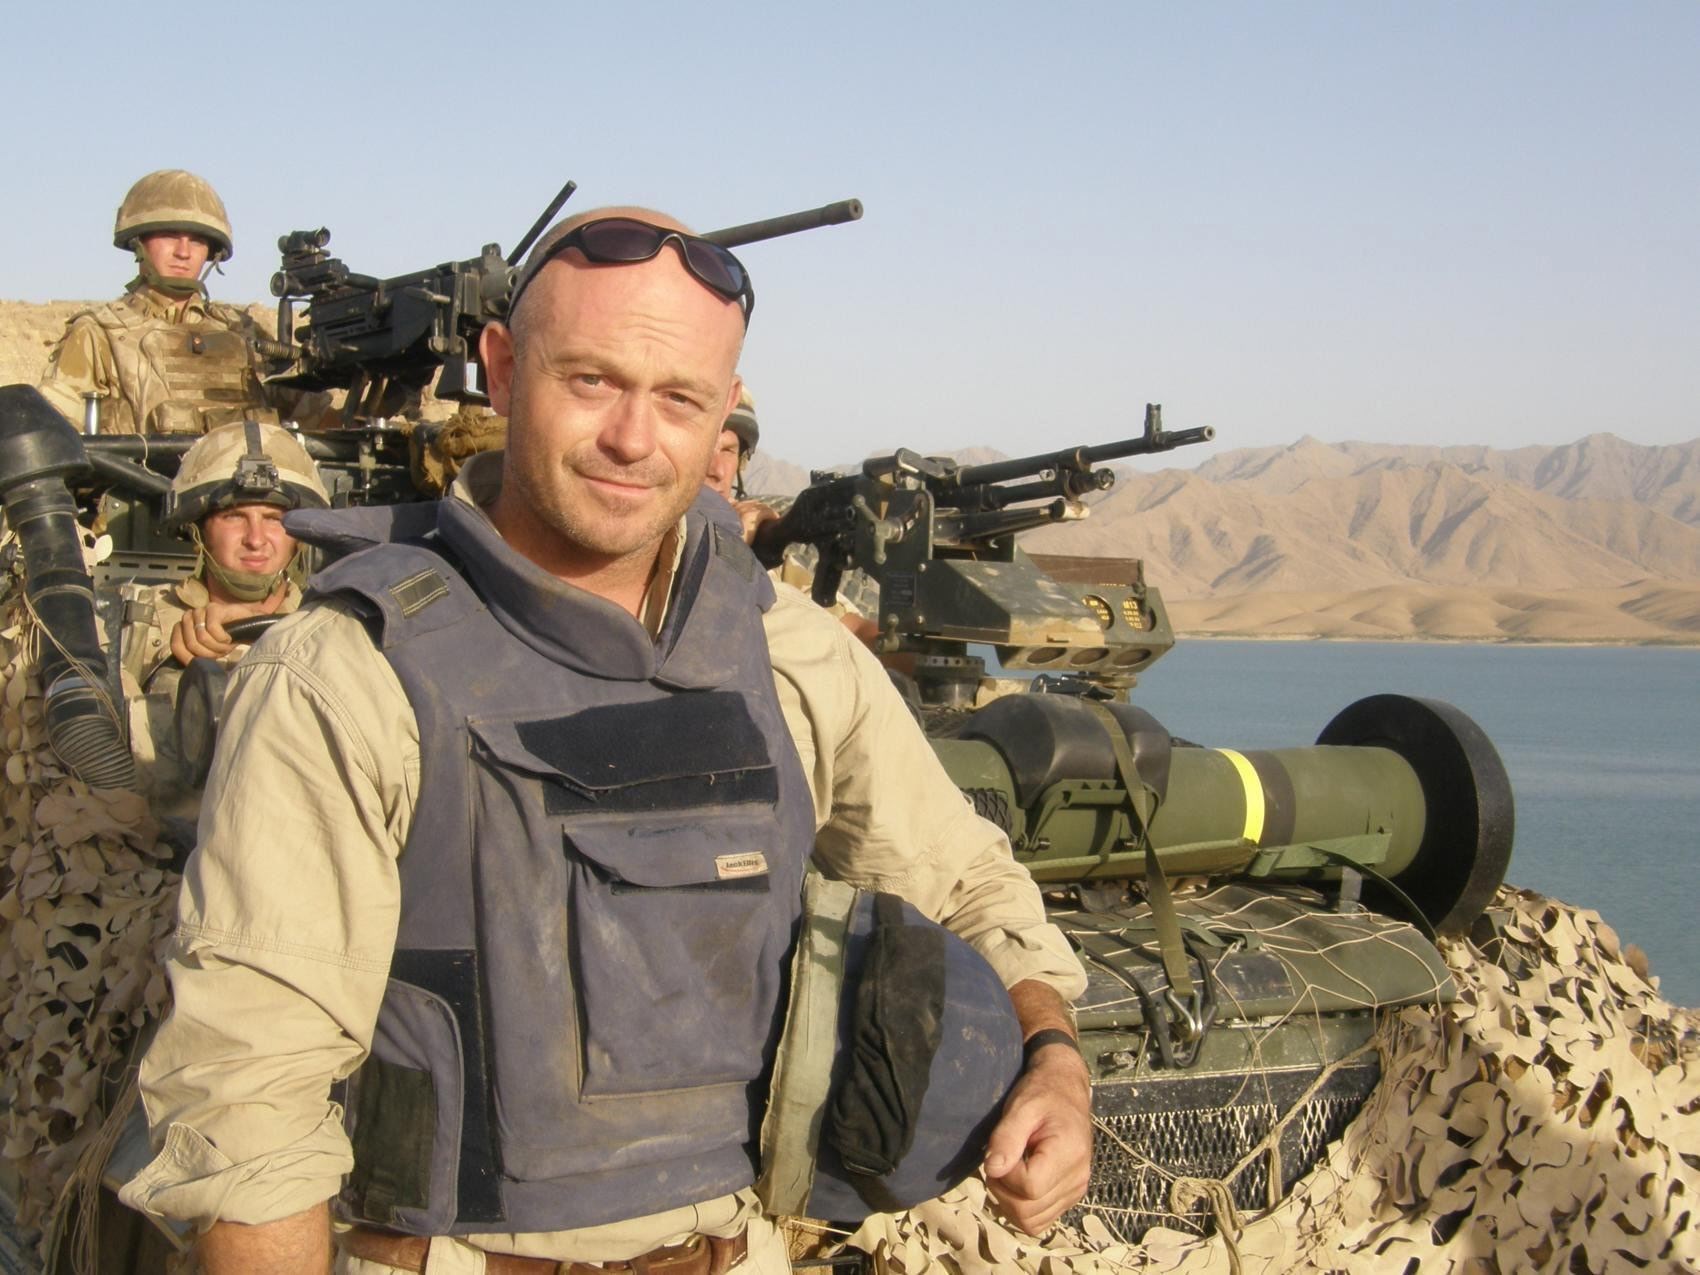 Ross Kemp, pictured in Afghanistan while filming for a documentary, has called for better representation of military veterans on television (Sky One/PA)